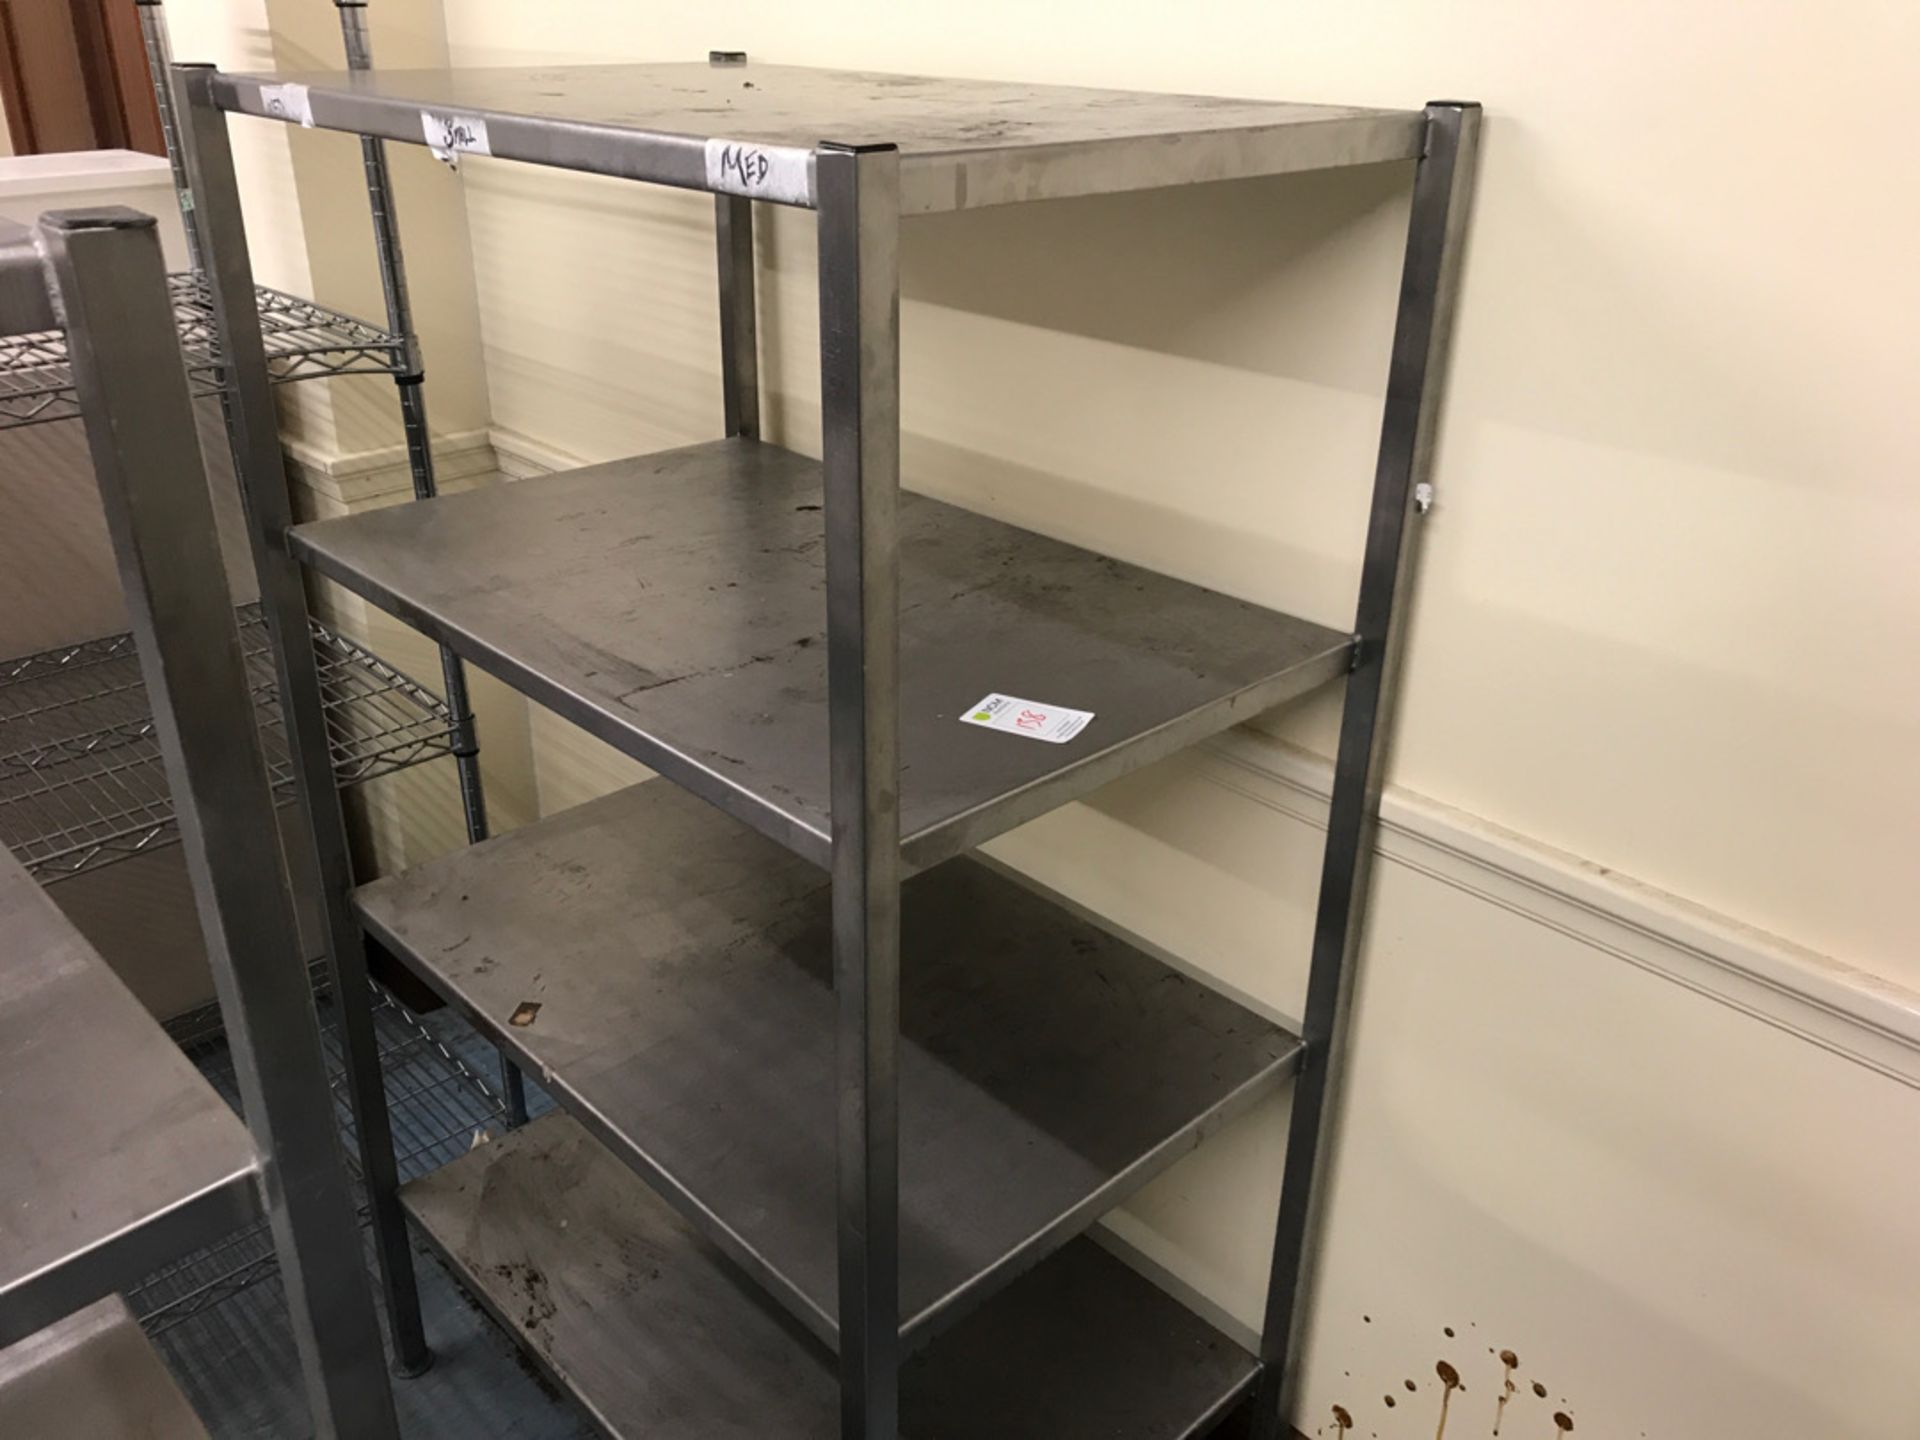 Stainless steel shelving unit